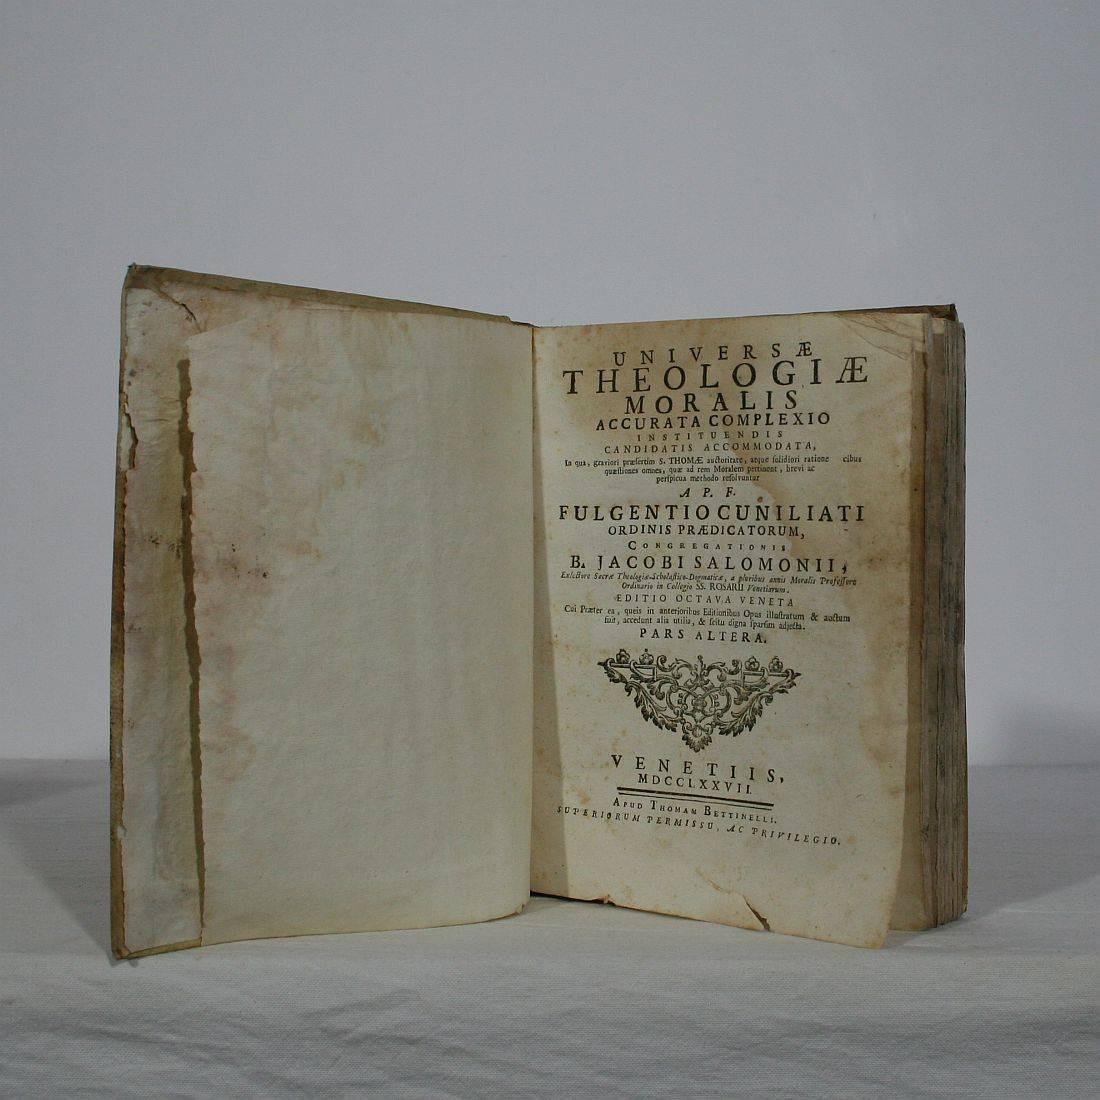 Nice collection of five weathered but very decorative vellum books from Venice/Napels Italy, 1763, 1776, 1777. Beautiful handwriting at the back of the books. One of the books has a secret hiding place!
More pictures are available.
Measurements